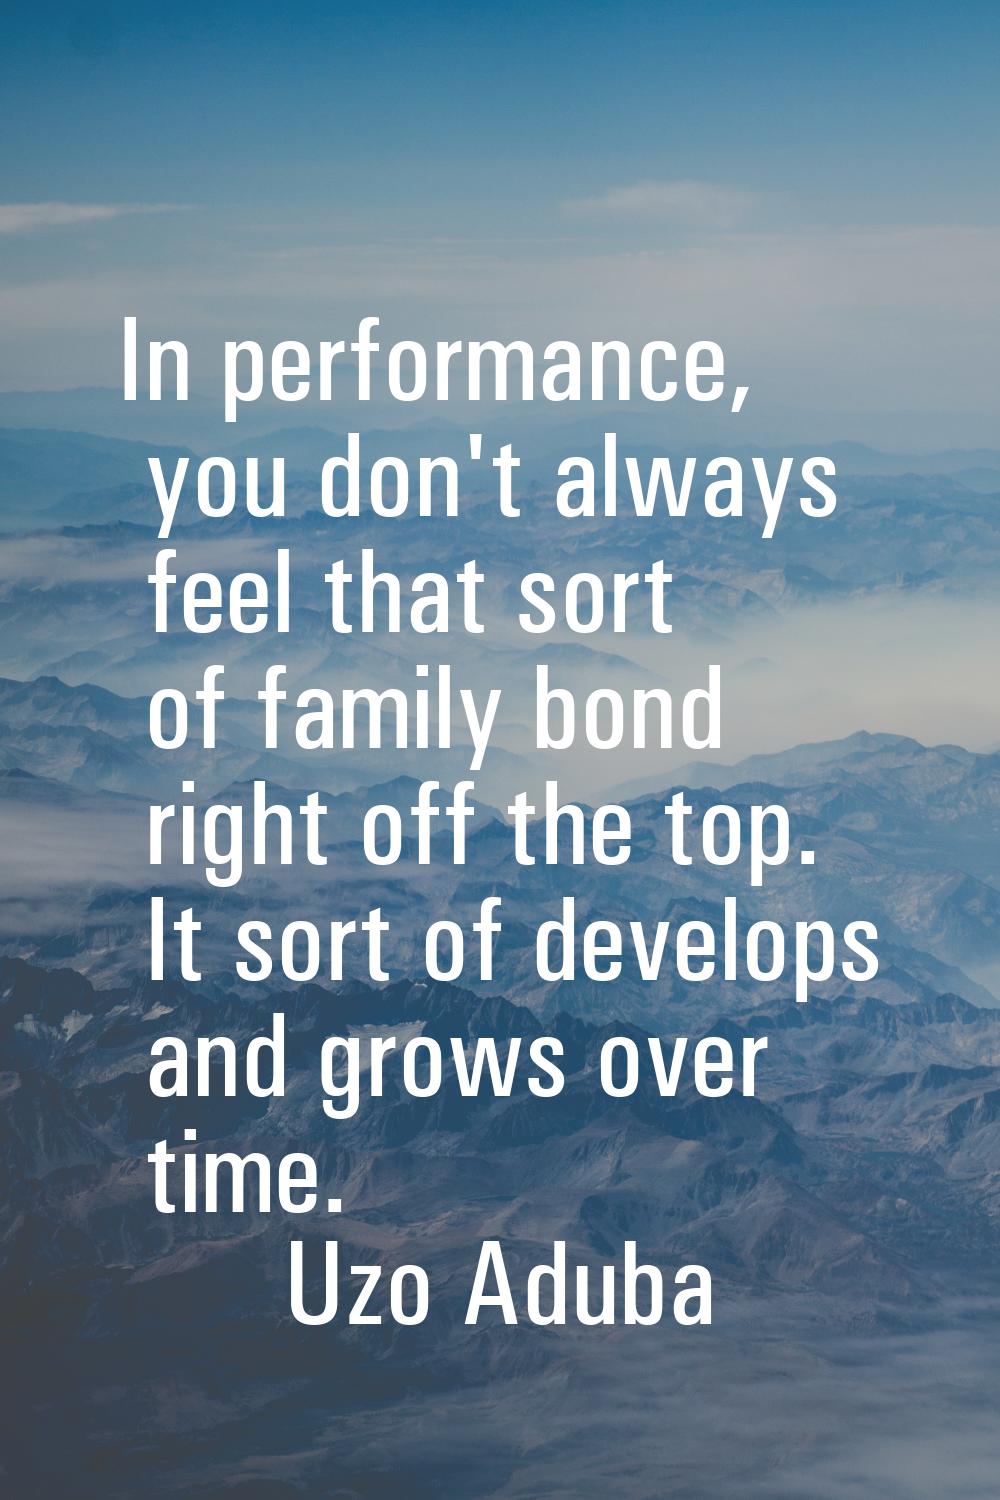 In performance, you don't always feel that sort of family bond right off the top. It sort of develo